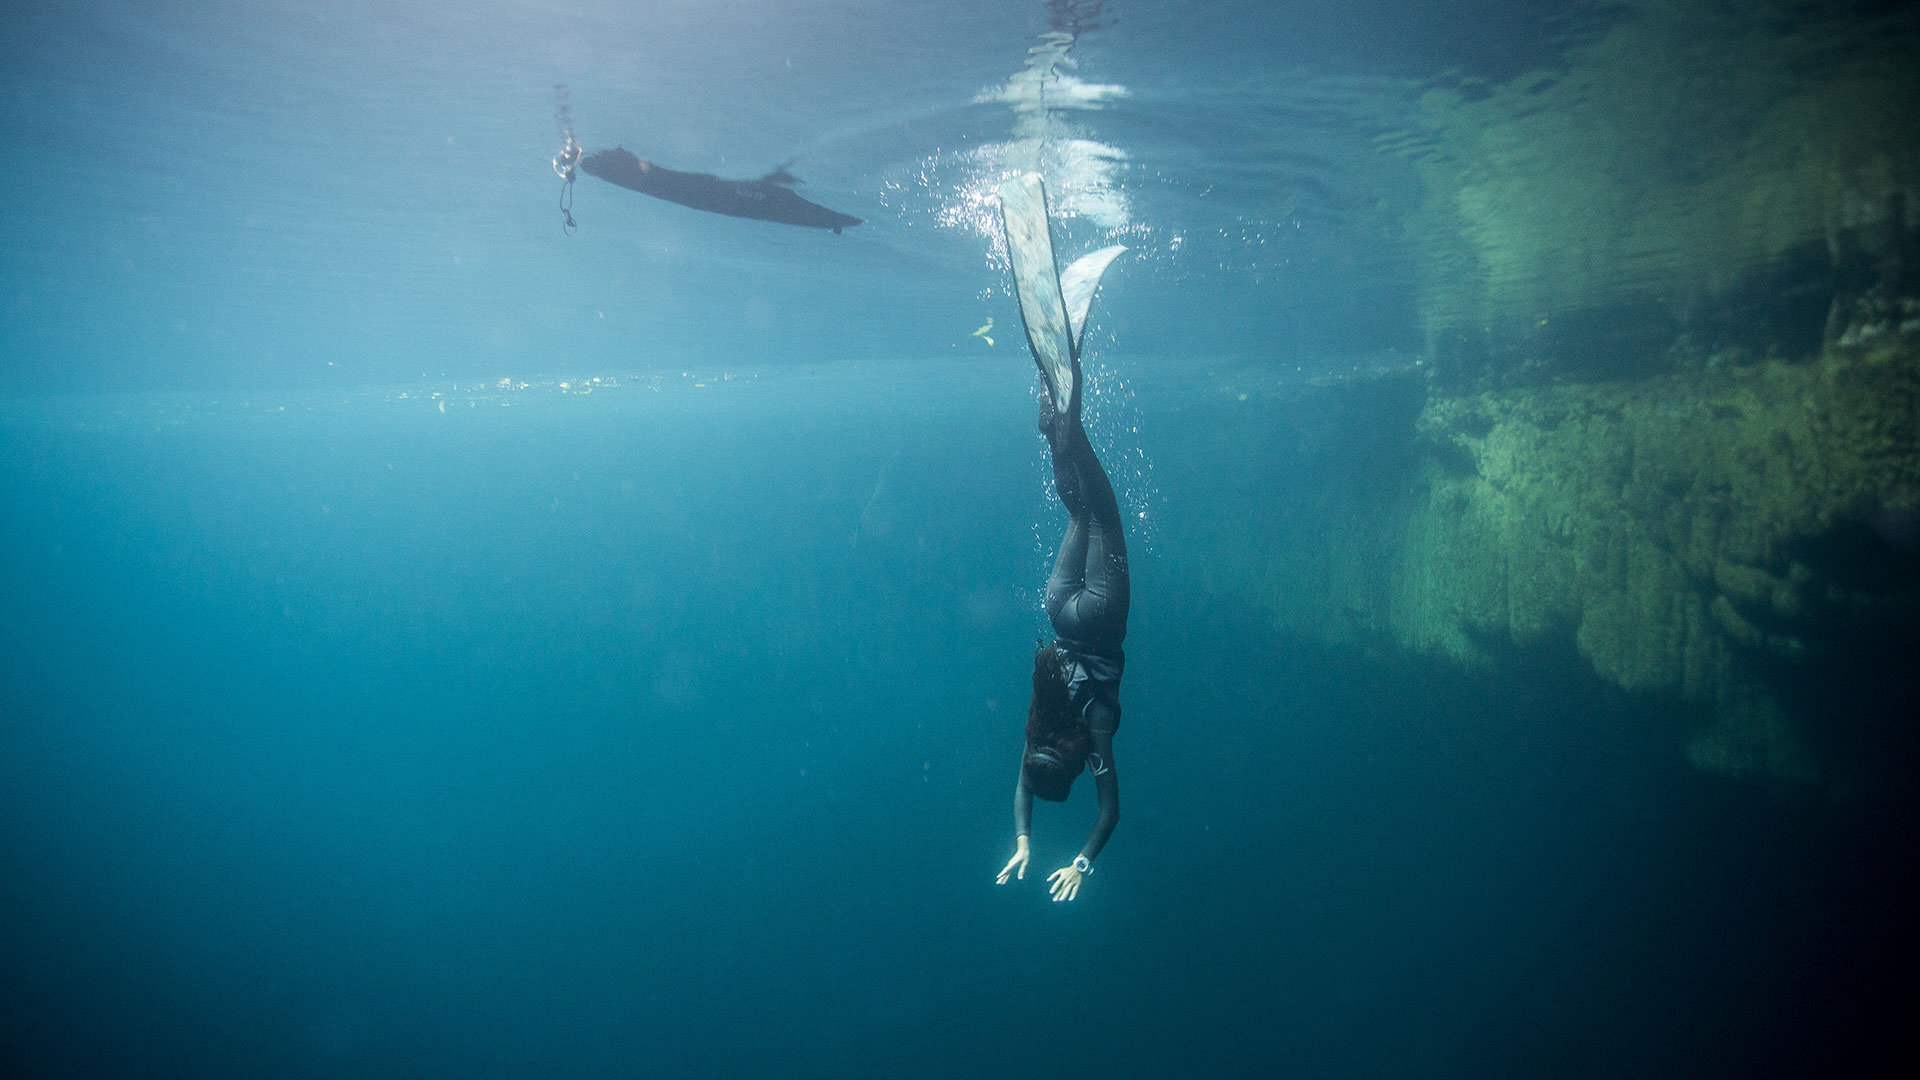 Freediving: A female skin underwater swimmer dives deeply into the lake. 1920x1080 Full HD Wallpaper.